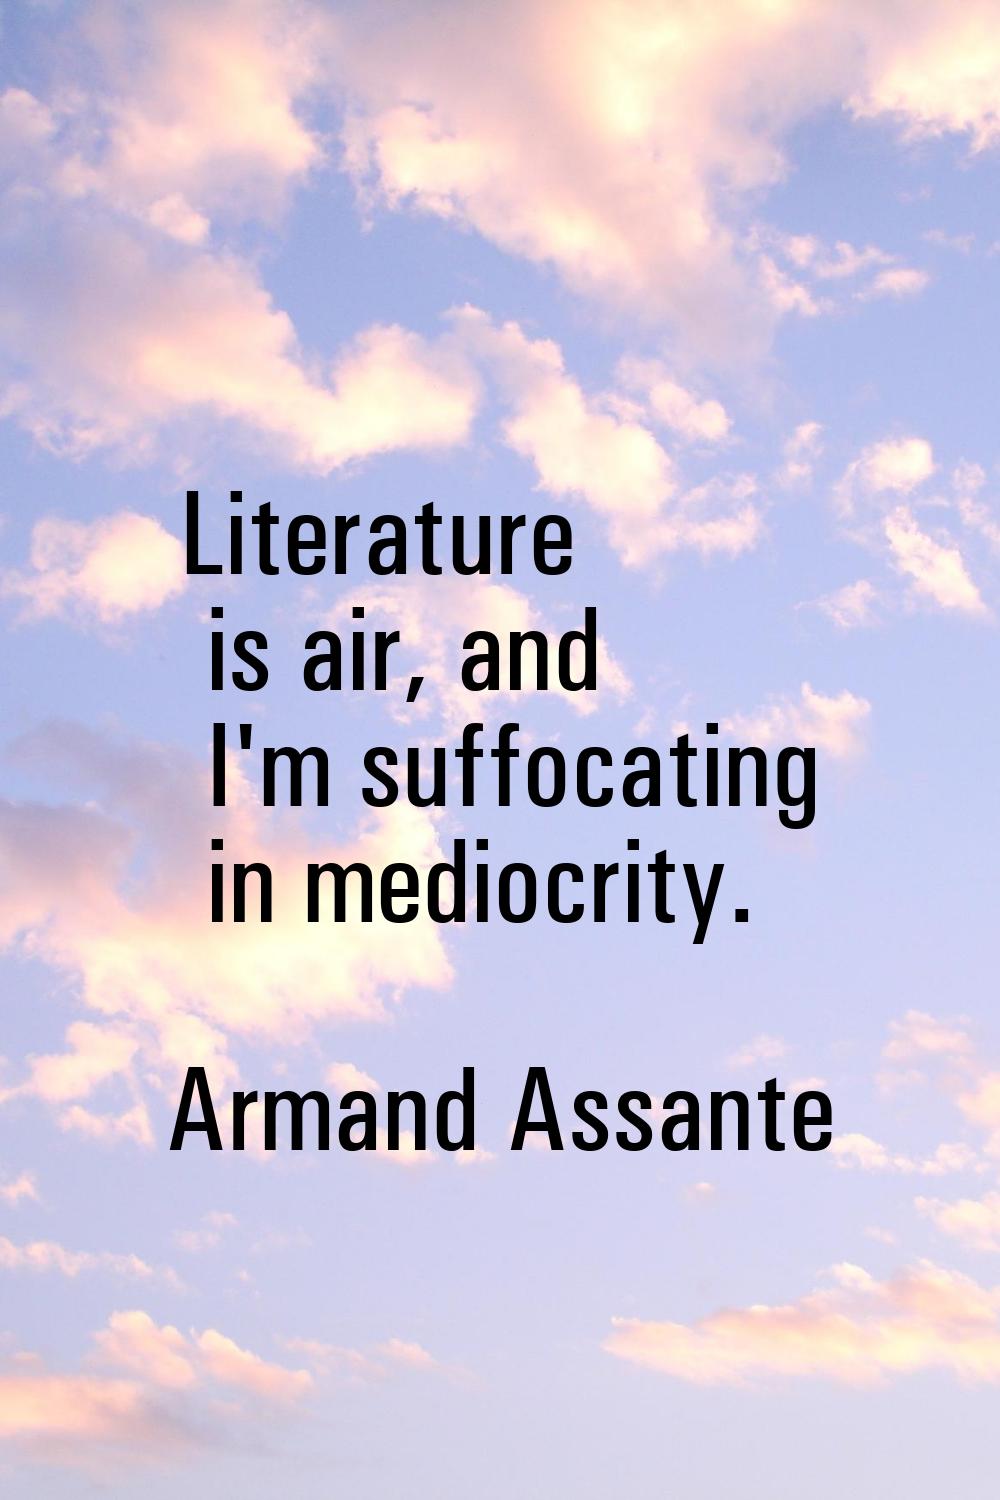 Literature is air, and I'm suffocating in mediocrity.